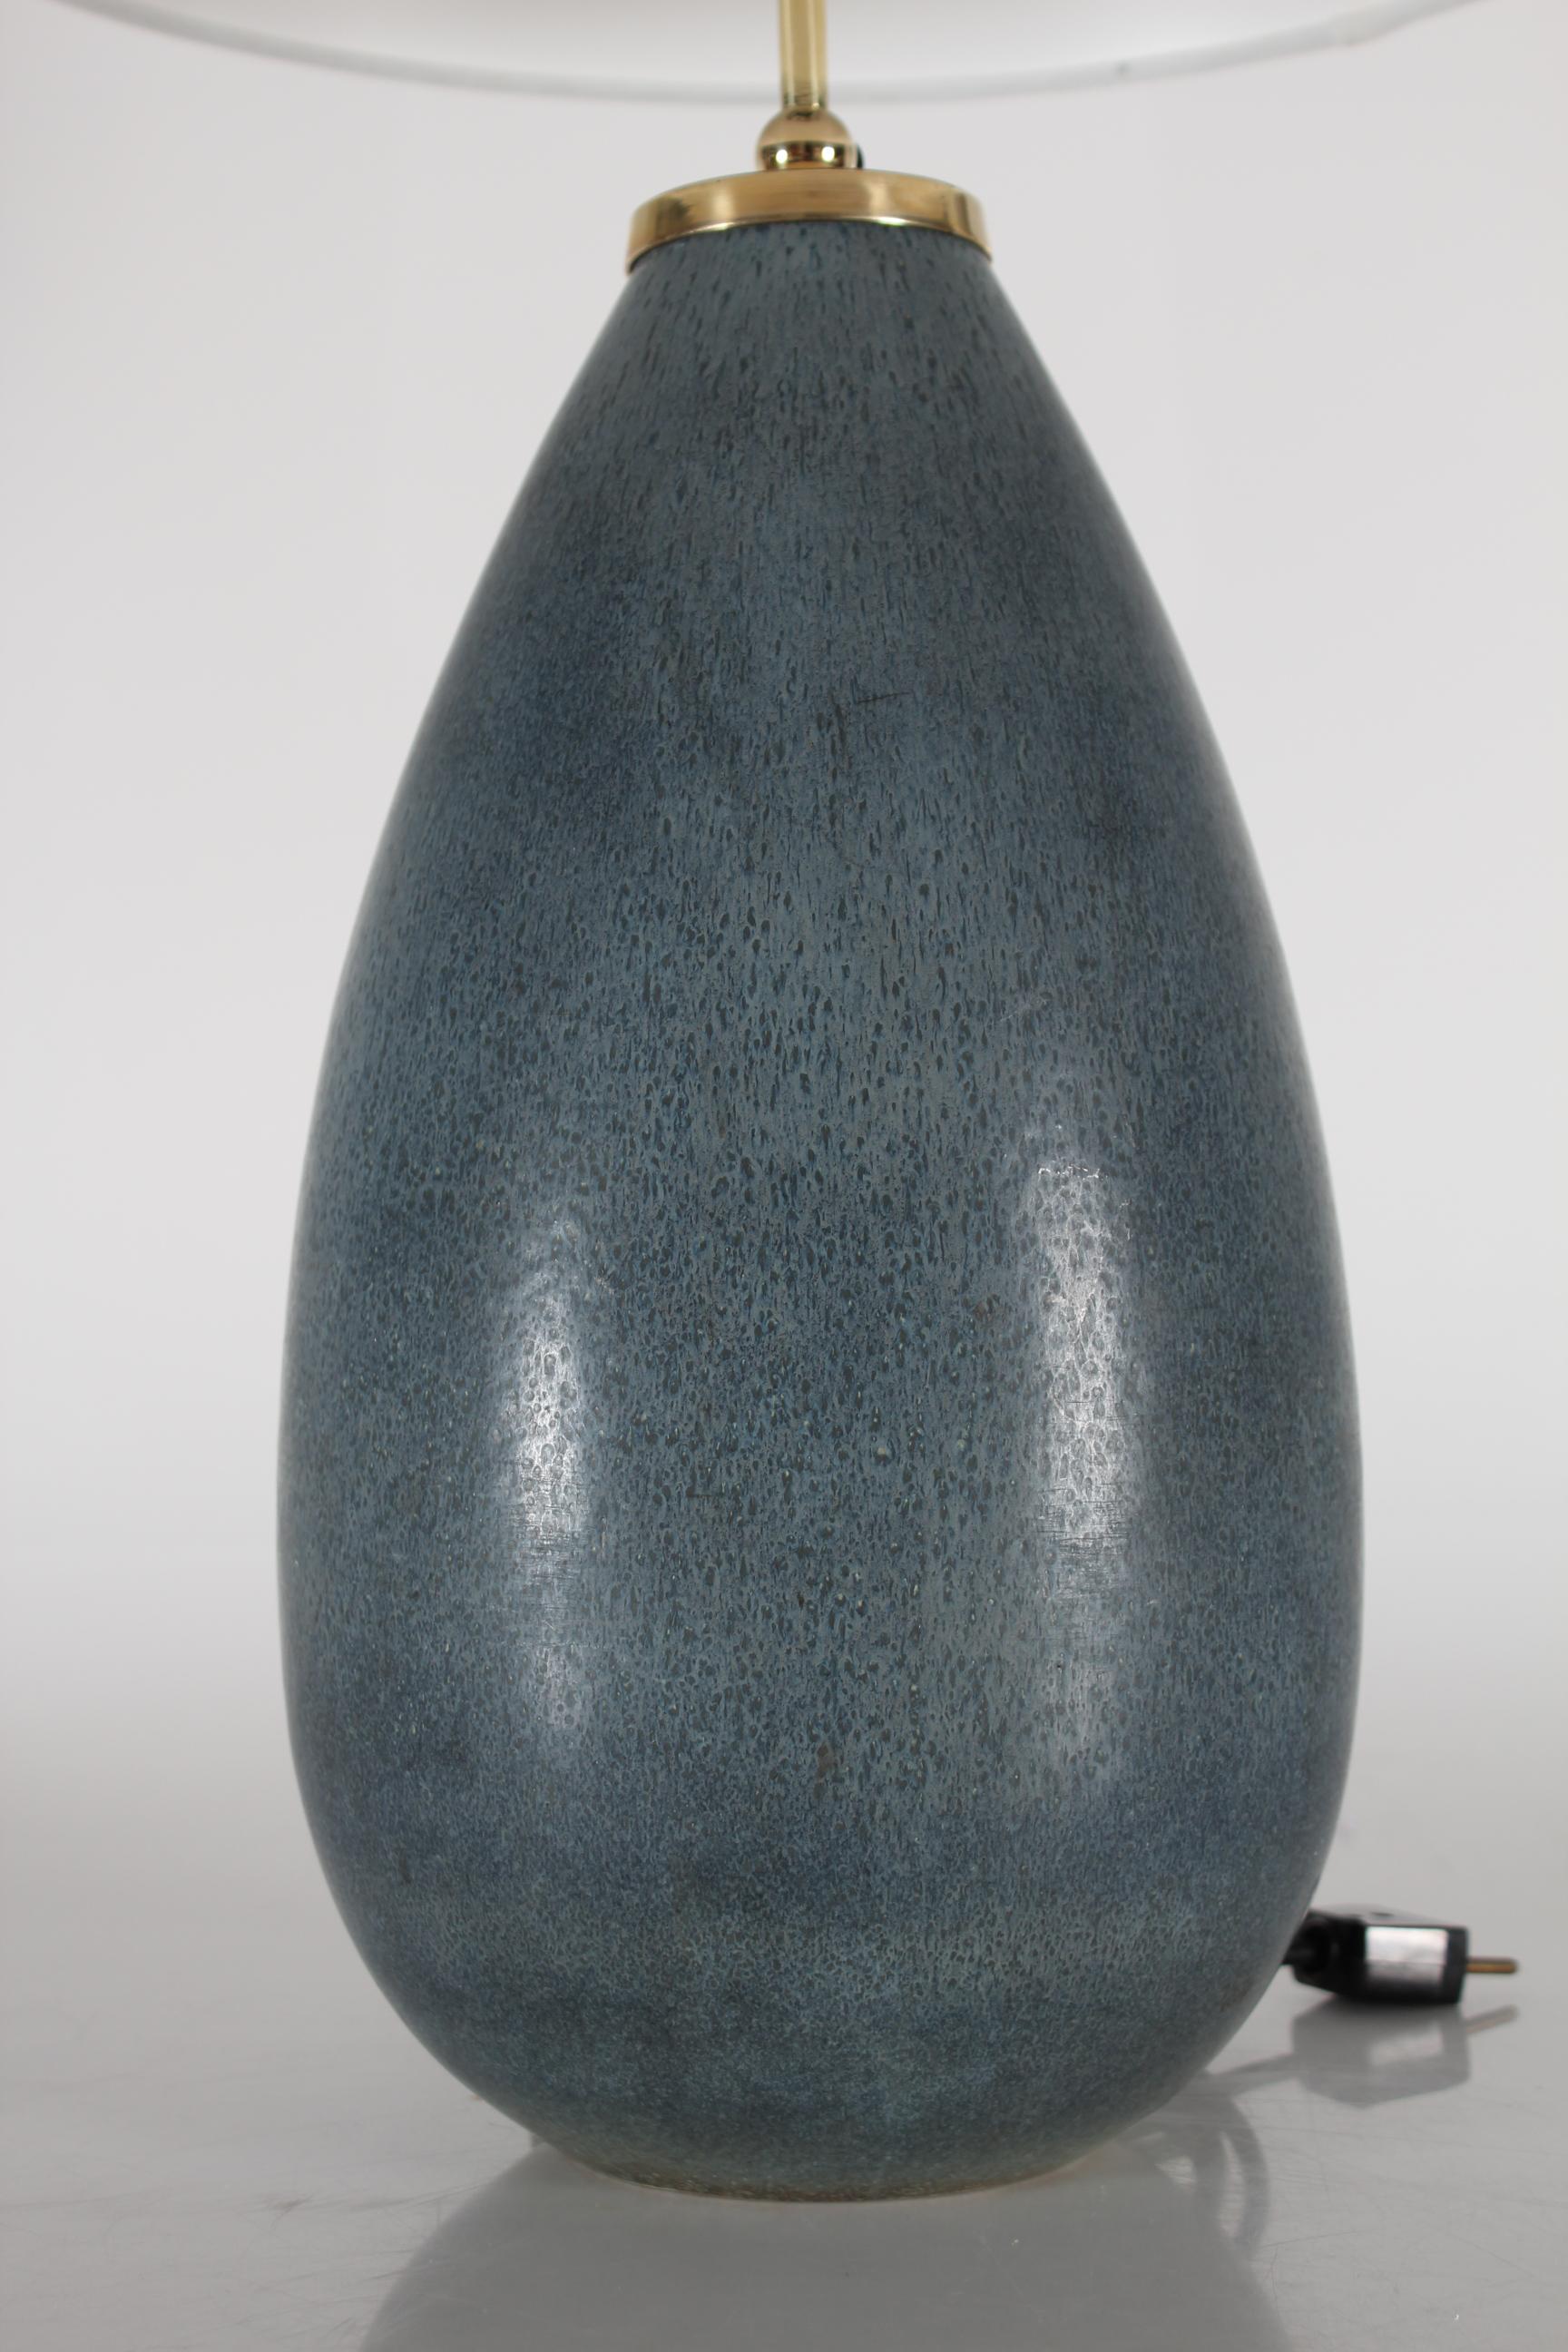 Large almost huge drop-shaped table lamp created by the famous Swedish ceramist Carl-Harry Stålhane (1920-1990) 
It's manufactured by Rörstrand Sweden in the 1960s.

The lamp base is decorated with bluish-green hare´s fur glaze with darker